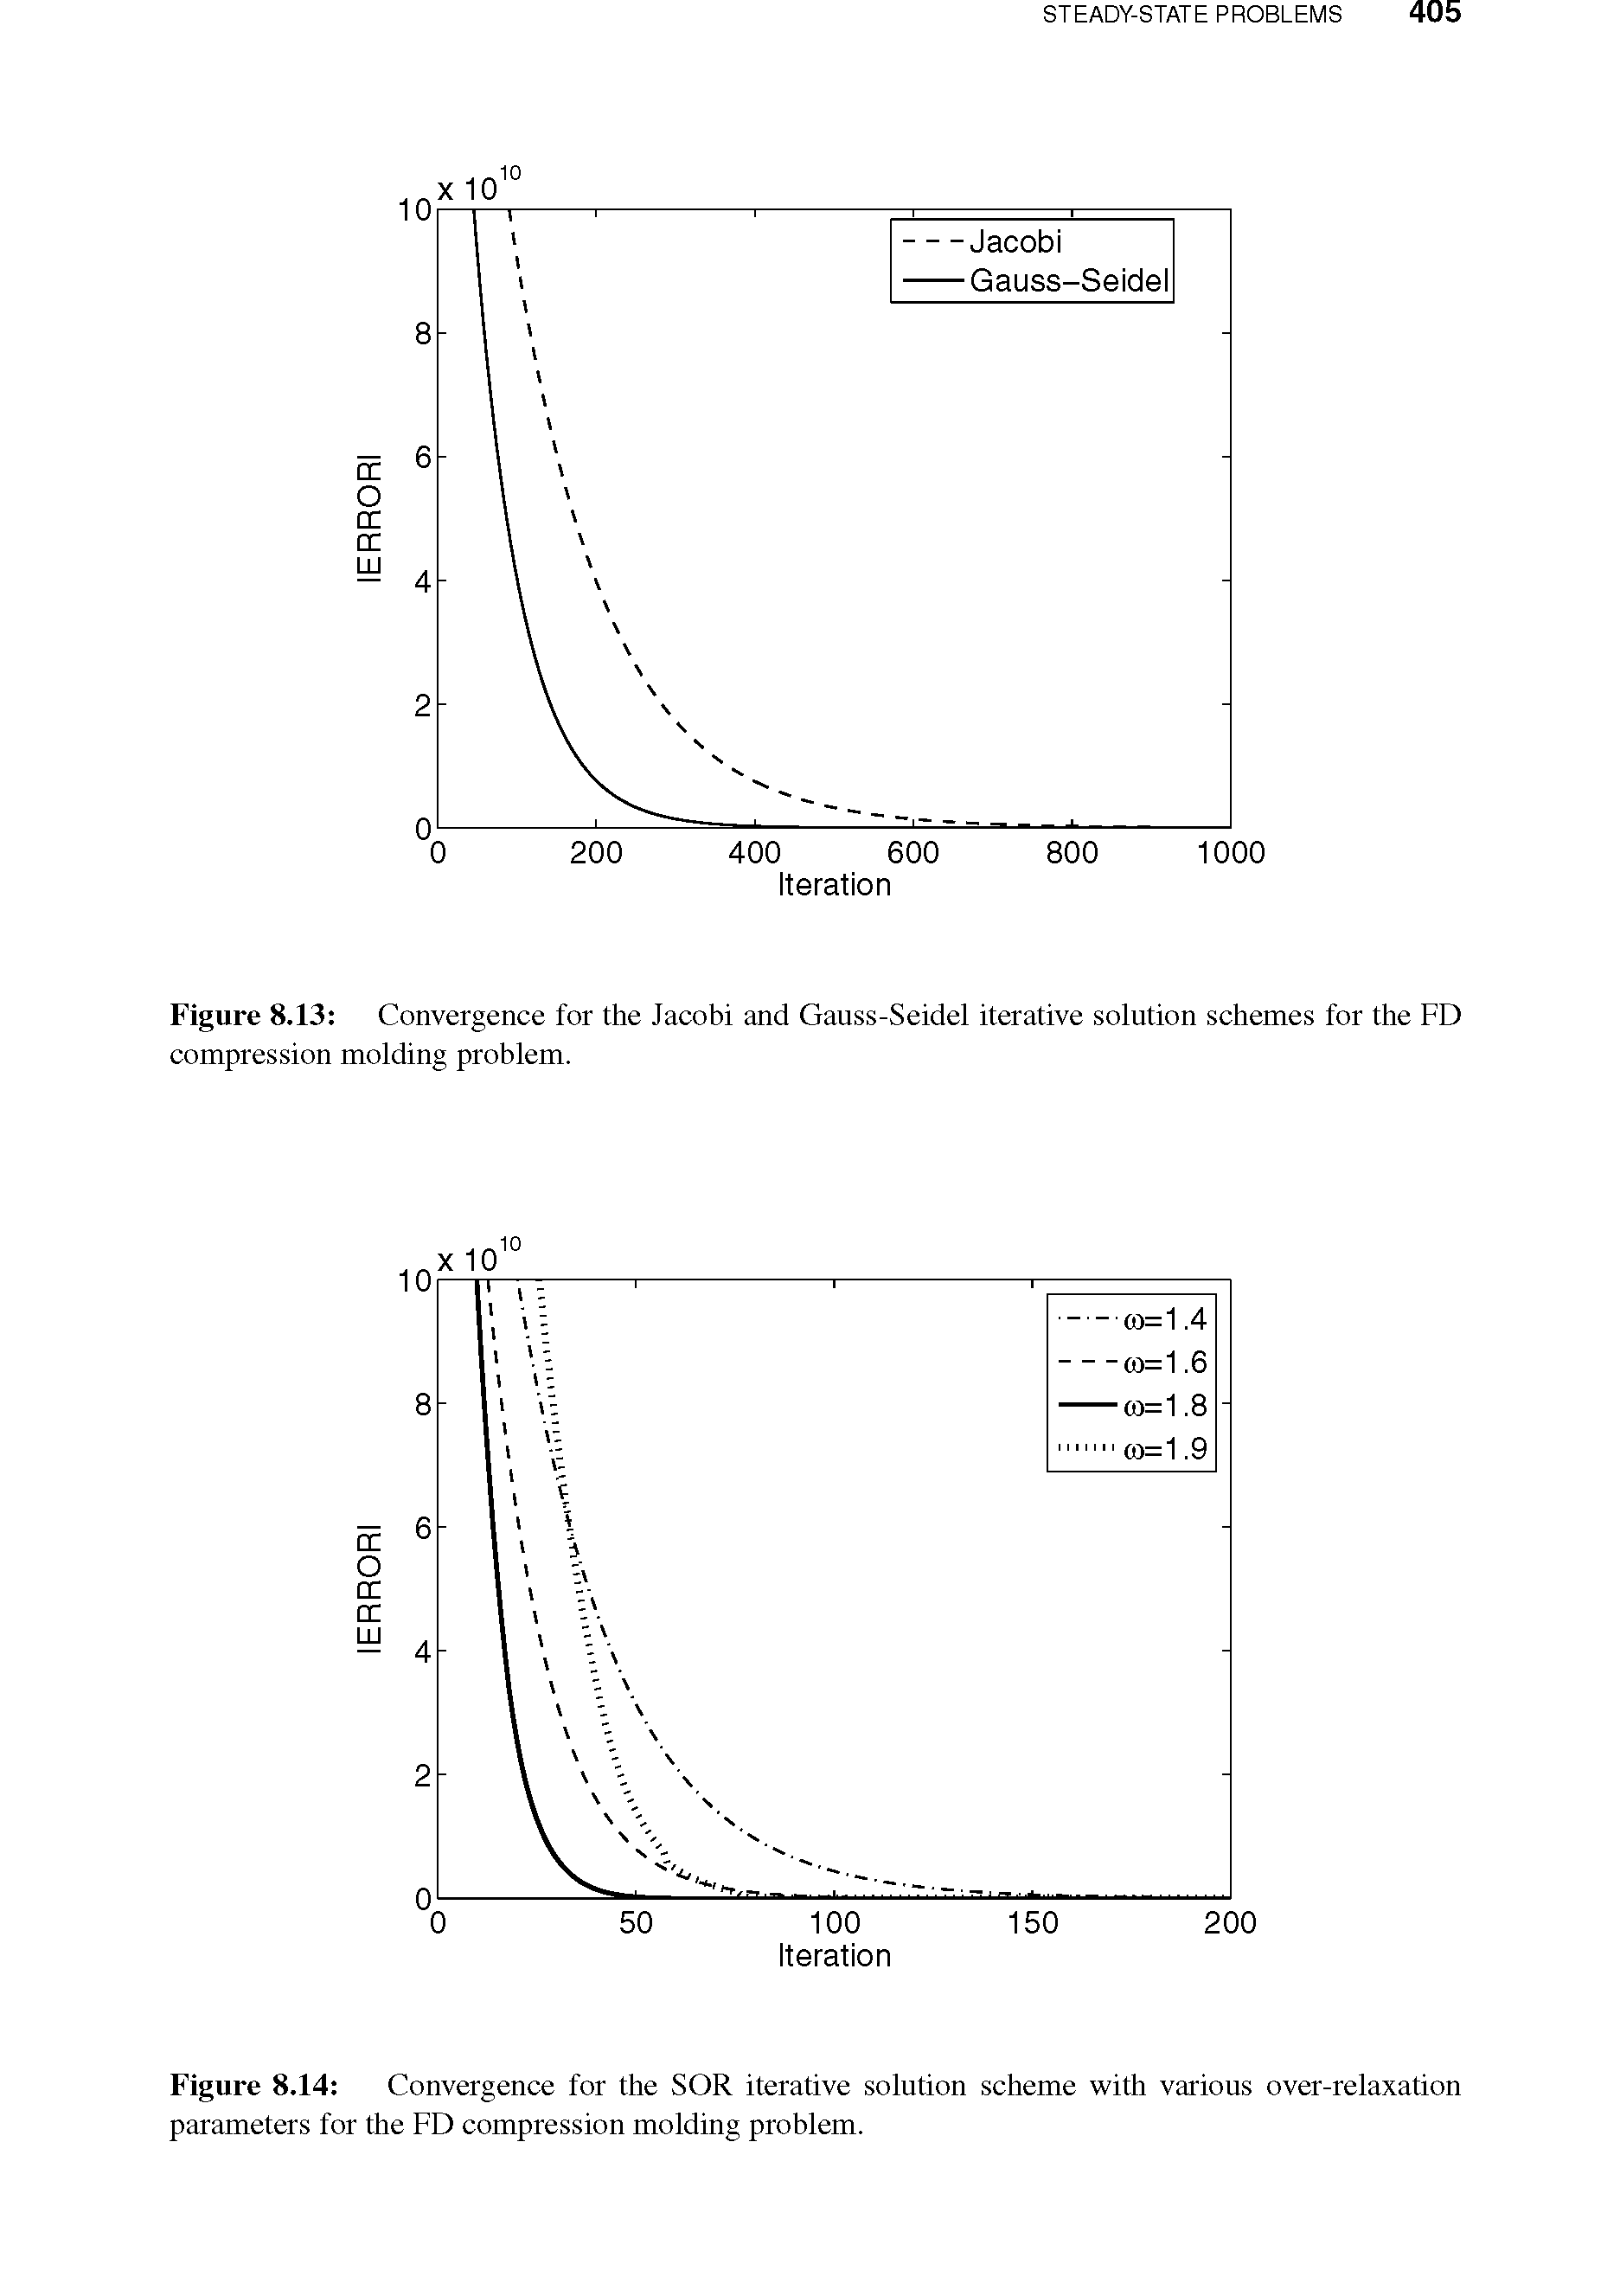 Figure 8.13 Convergence for the Jacobi and Gauss-Seidel iterative solution schemes for the FD compression molding problem.